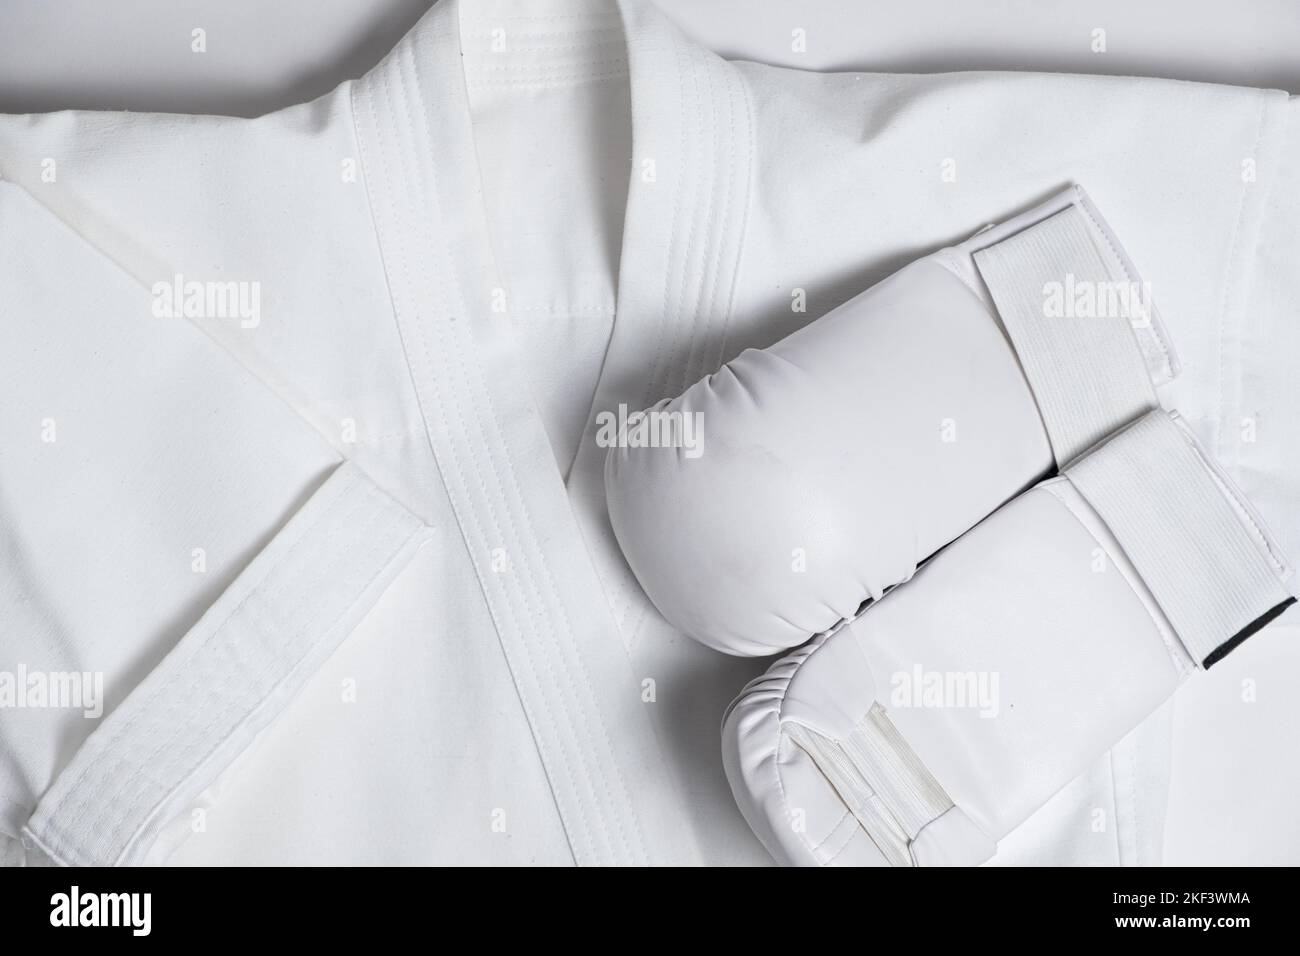 Kimono and white gloves for karate training for children, top view Stock Photo